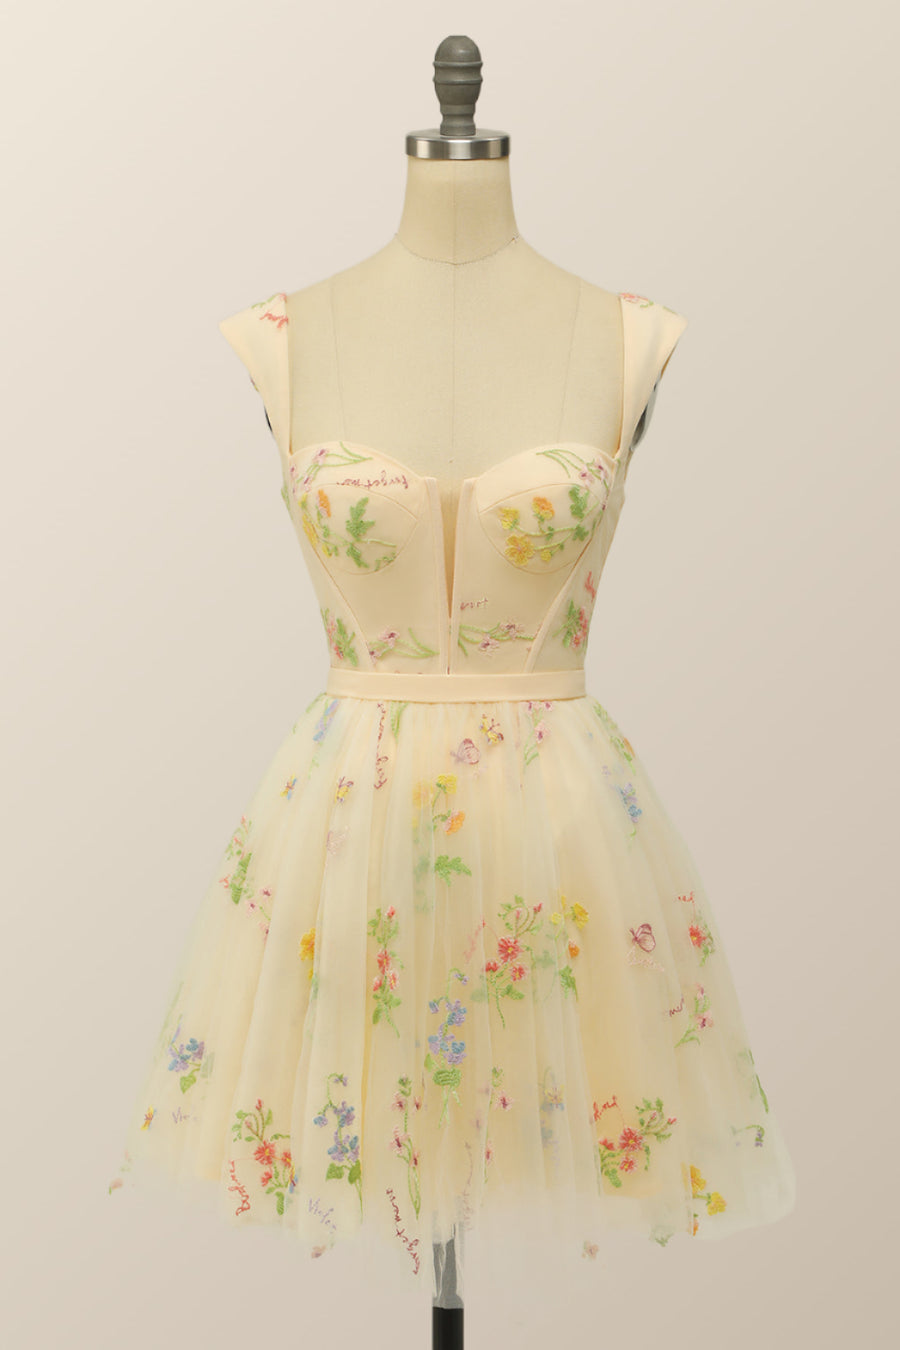 Short Champagne Floral A-line Princess Dress with Cap Sleeves